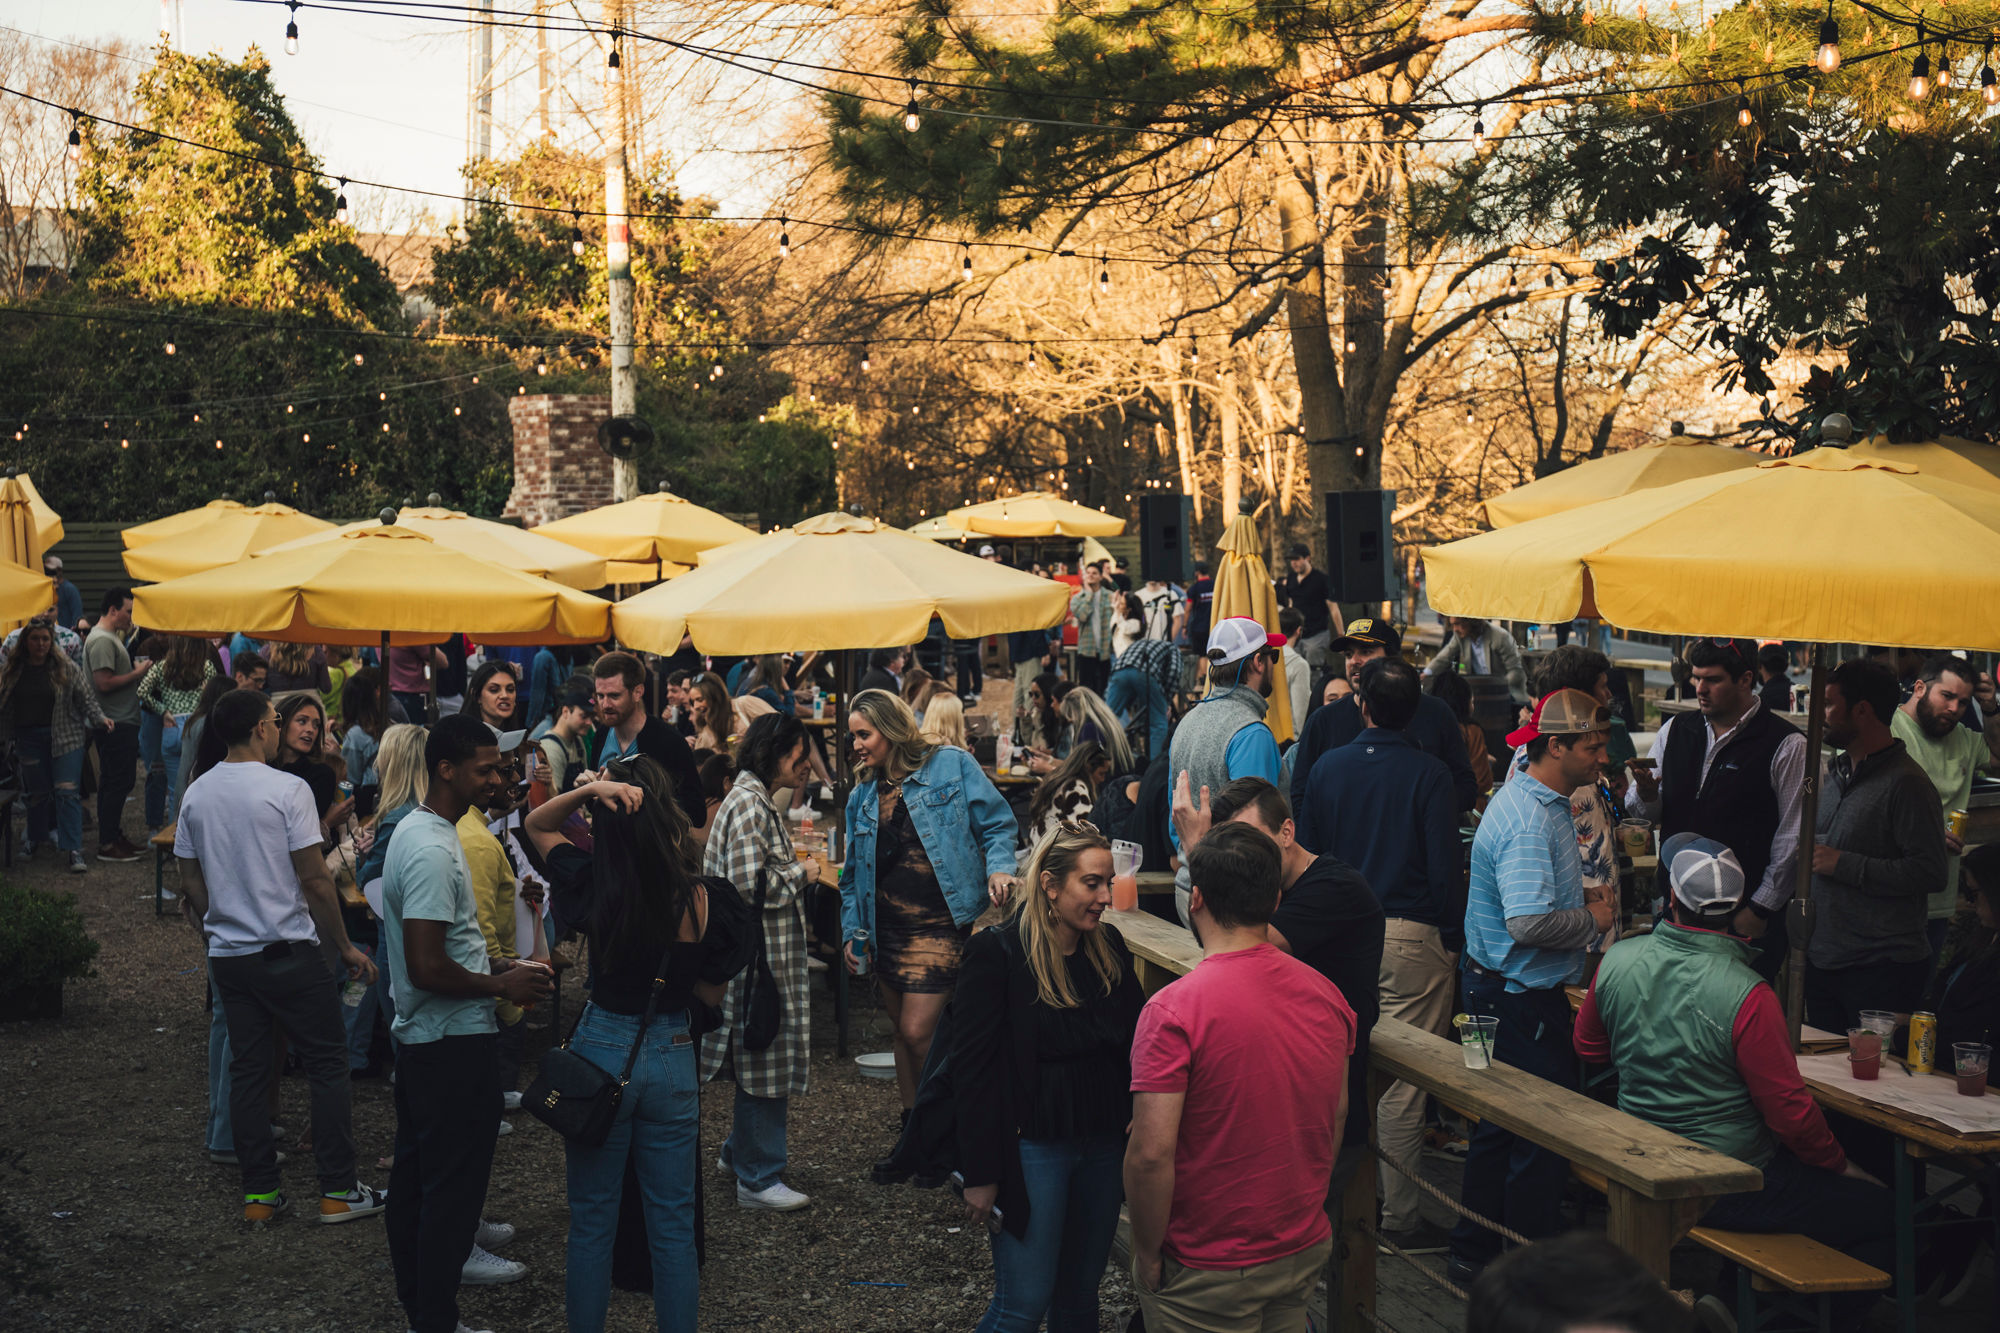 Ladybird Grove & Mess Hall offers fun vibes and outdoor dining year-round